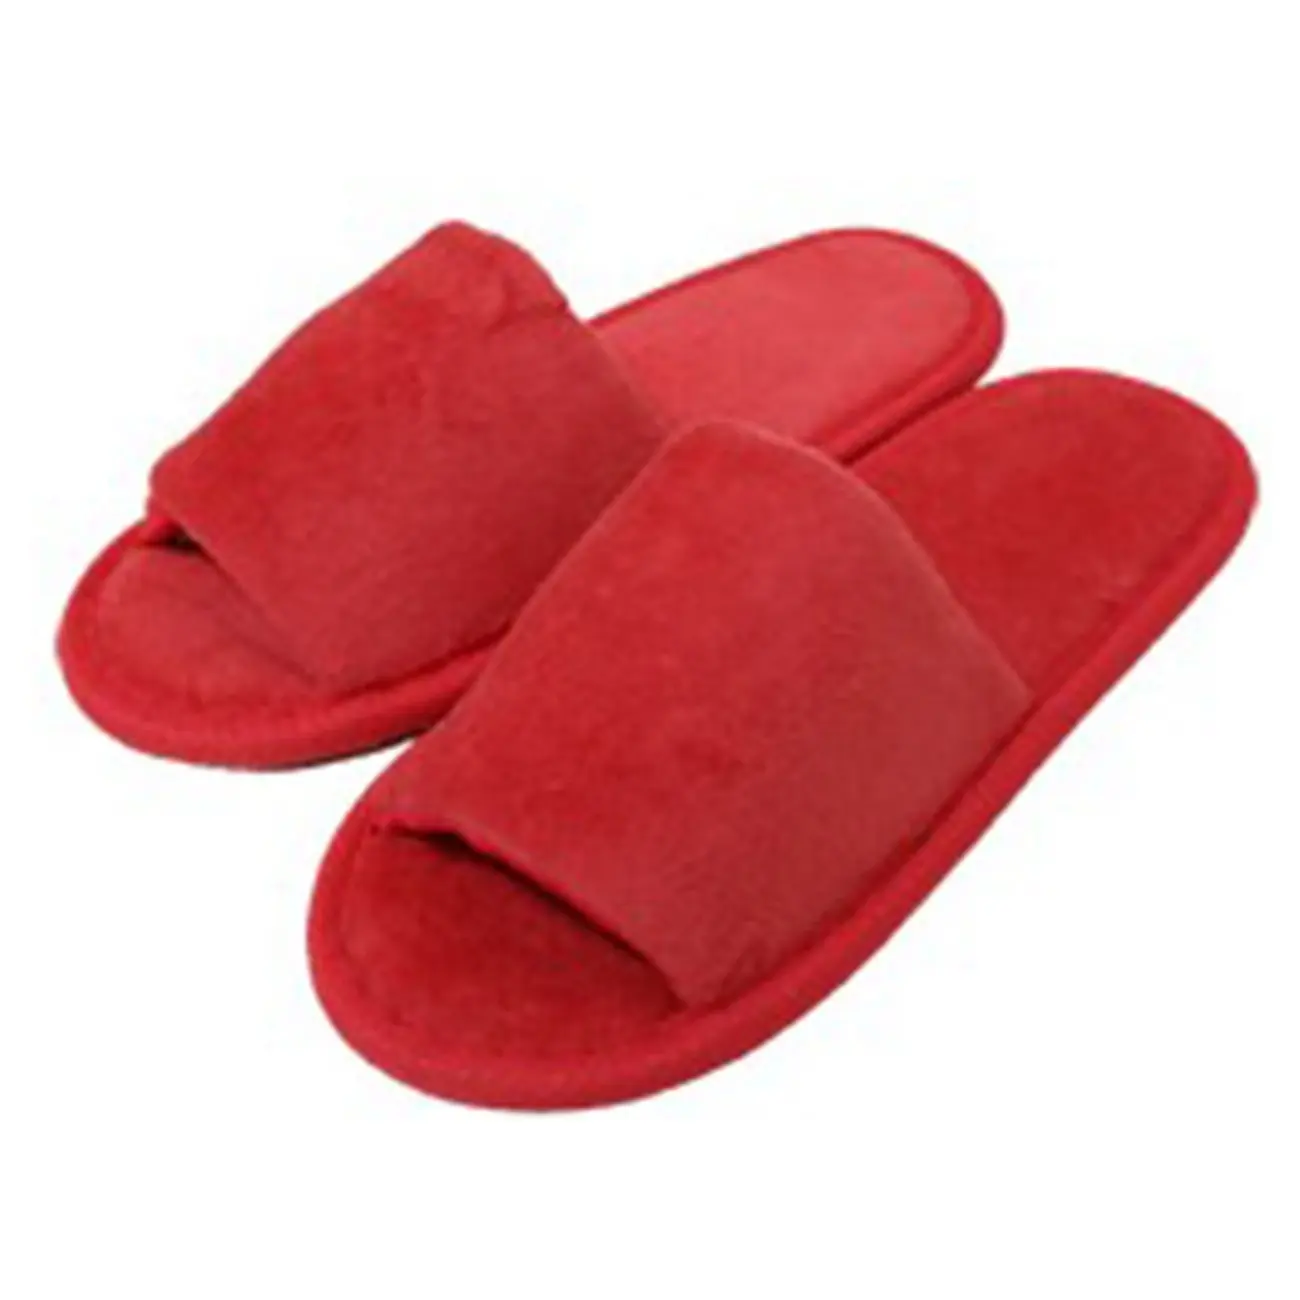 spa slippers wholesale